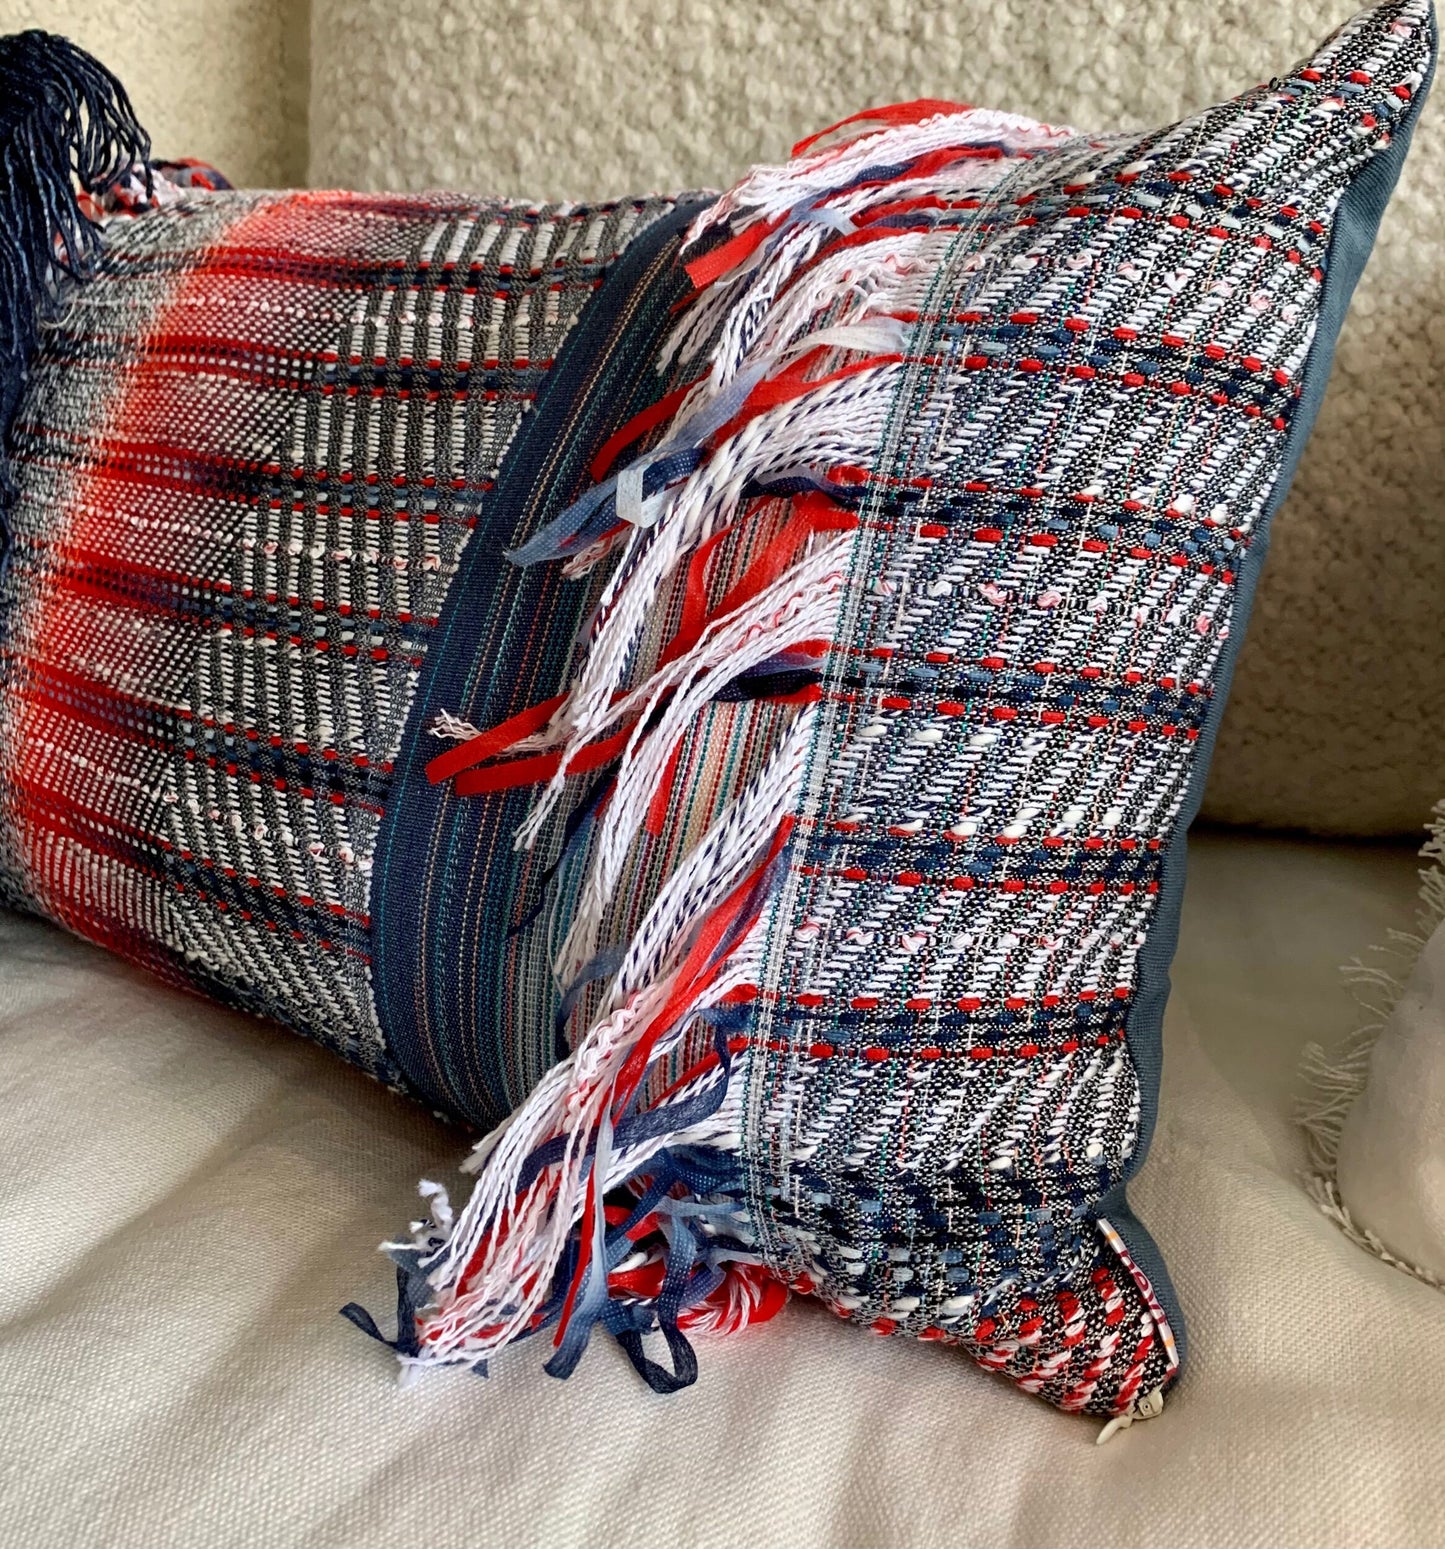 Rectangular pillow cover Fringes and Stripes.